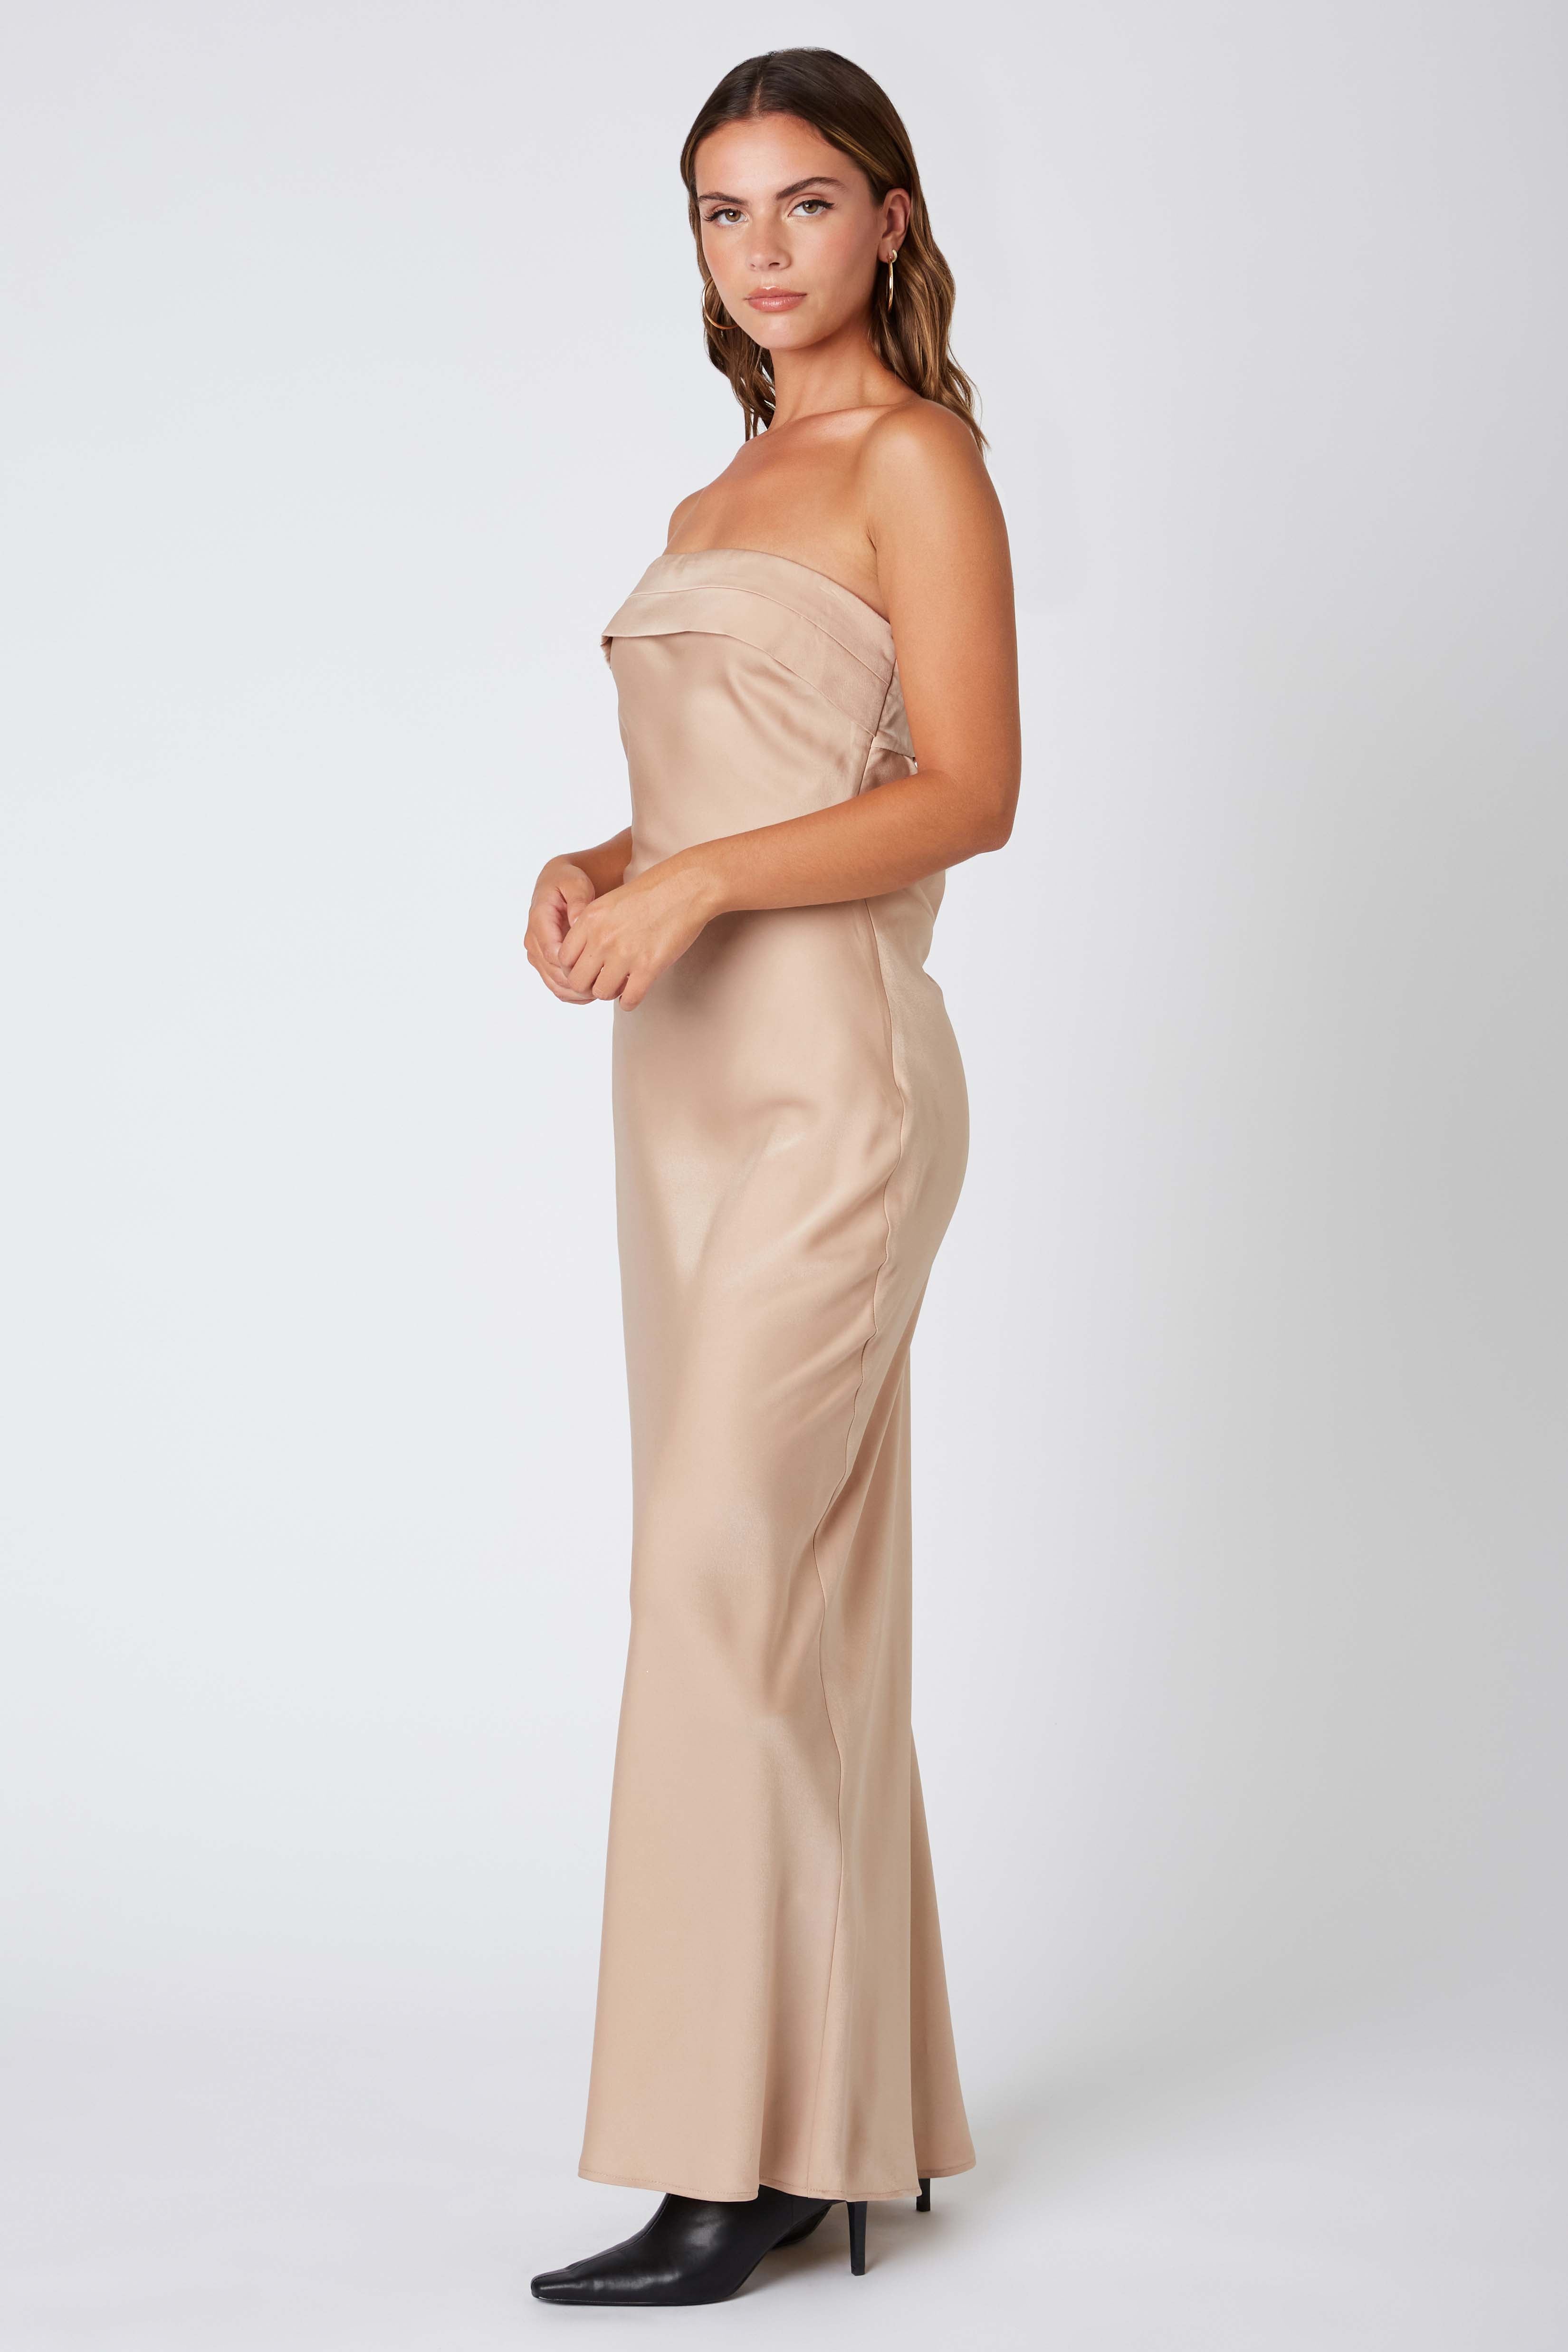 Strapless Bias Gown in Almond Side View